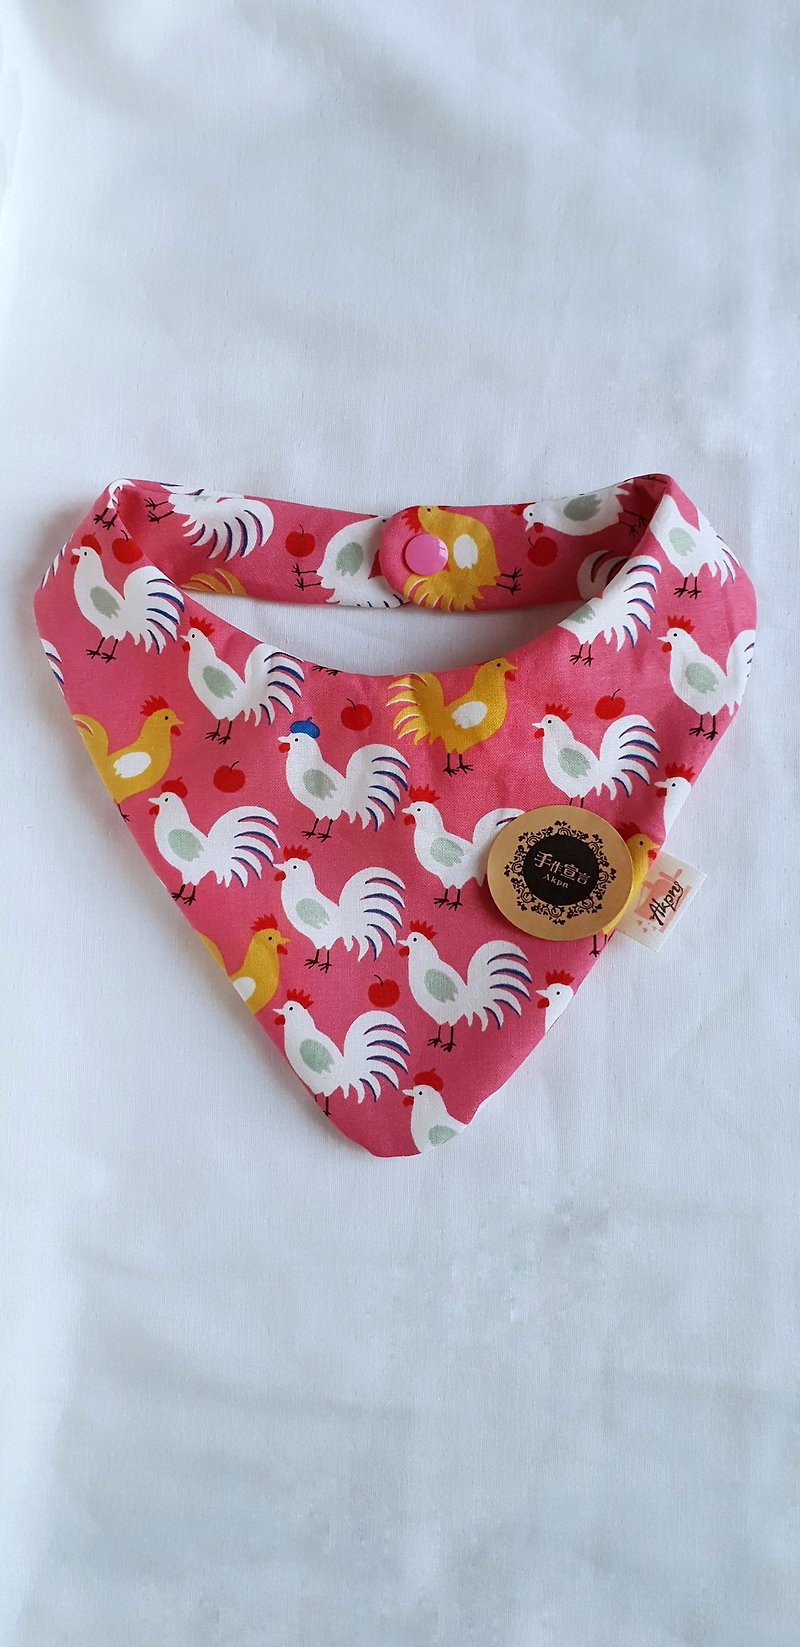 Rooster apple surface thin cotton cloth and sandwich four-layer gauze angled saliva towel bib. A total of six layers - Bibs - Cotton & Hemp Pink